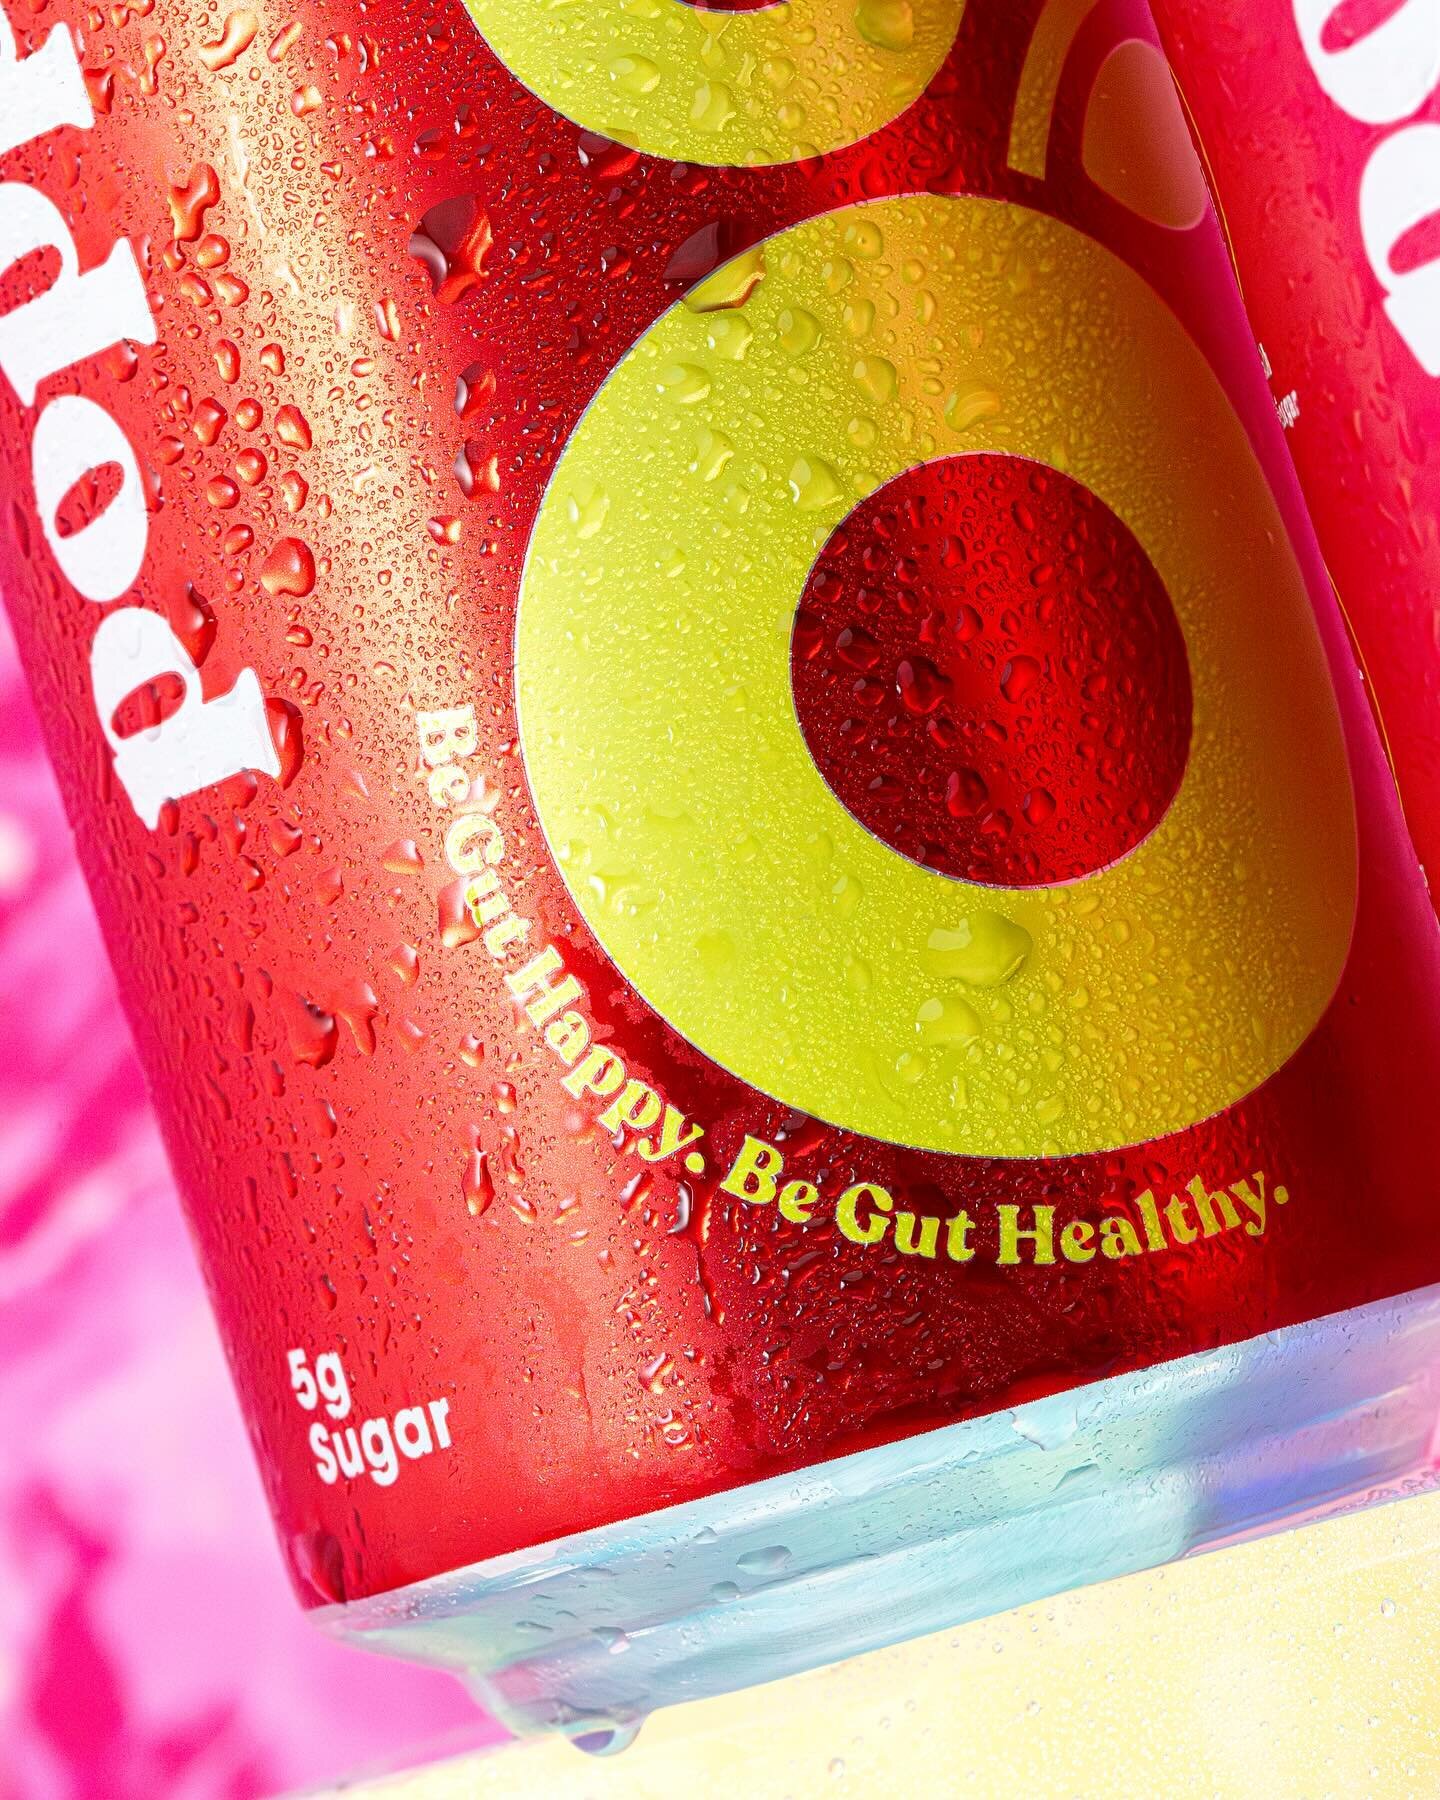 The can says it all! A soda alternative that actually tastes delicious AND benefits gut health? Refreshing in more ways than one. 😍

Cc: @drinkpoppi 

.
.
.
#productphotography #commercialphotographer #drinkpoppi #poppi #healthysoda #sodaalternative